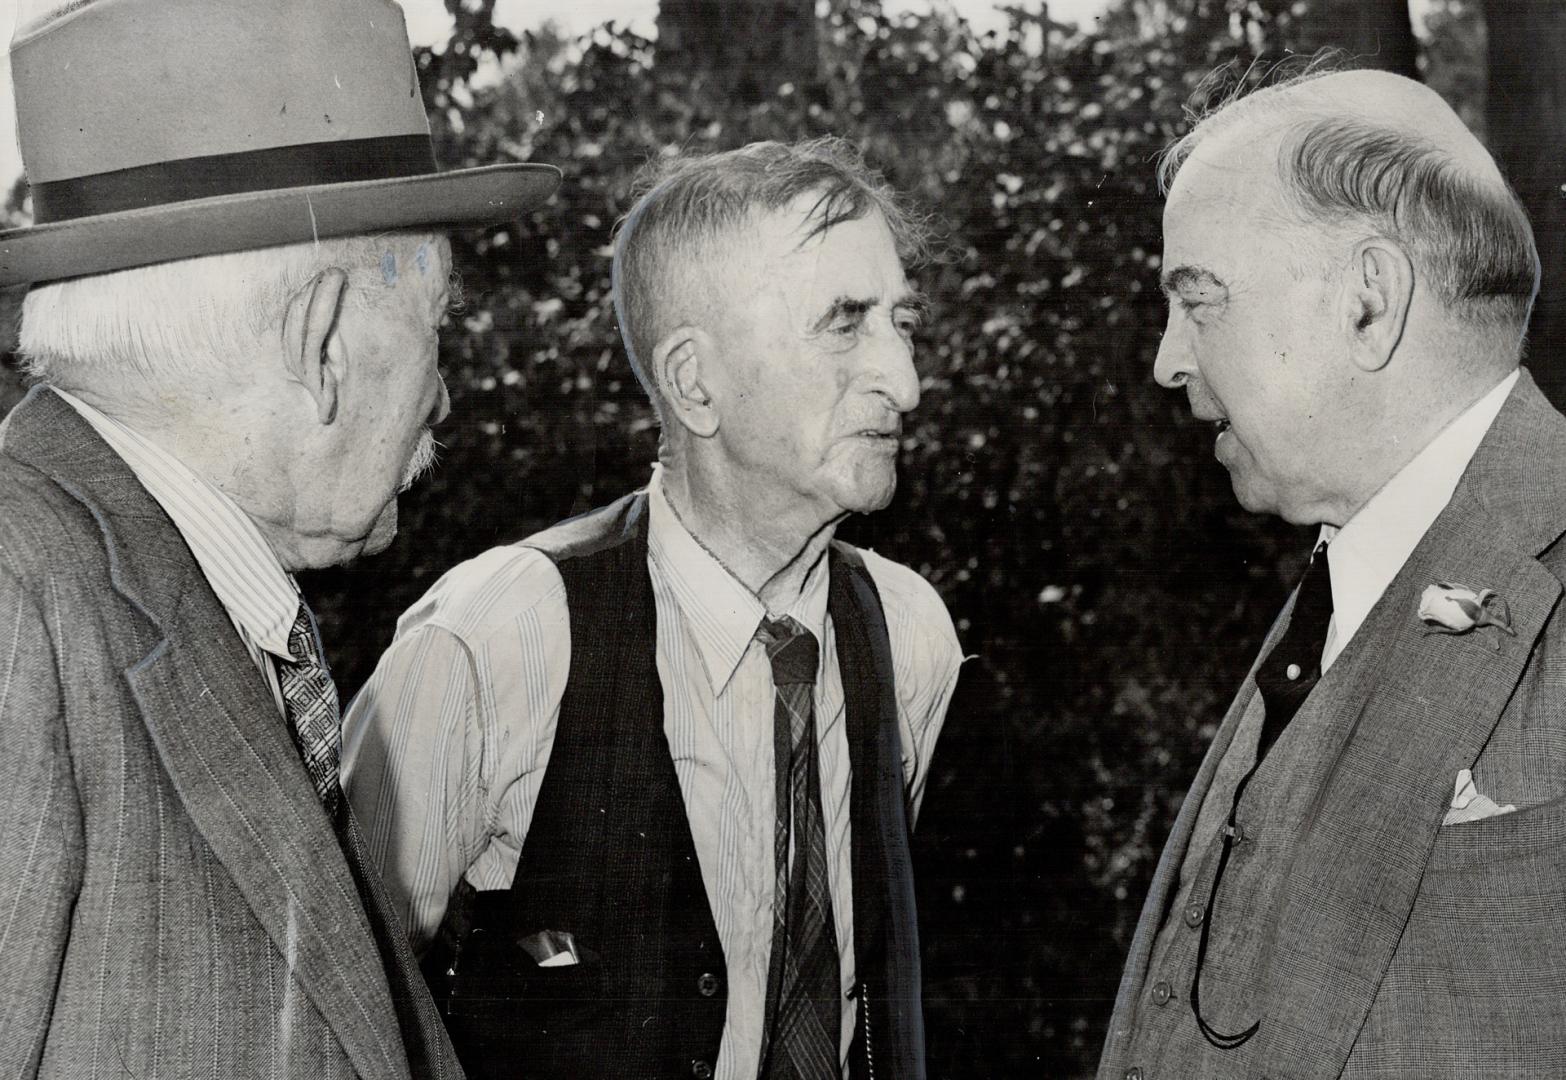 A Tumultuous welcome greeted ex-prime minister during his visit to Waterloo county in 1947. He greets two friends, Dr. T. M. Robinson, 88, and William Winkler, 91. Mr. King's goal was to improve conditions and to bring about well-being of Canadians.